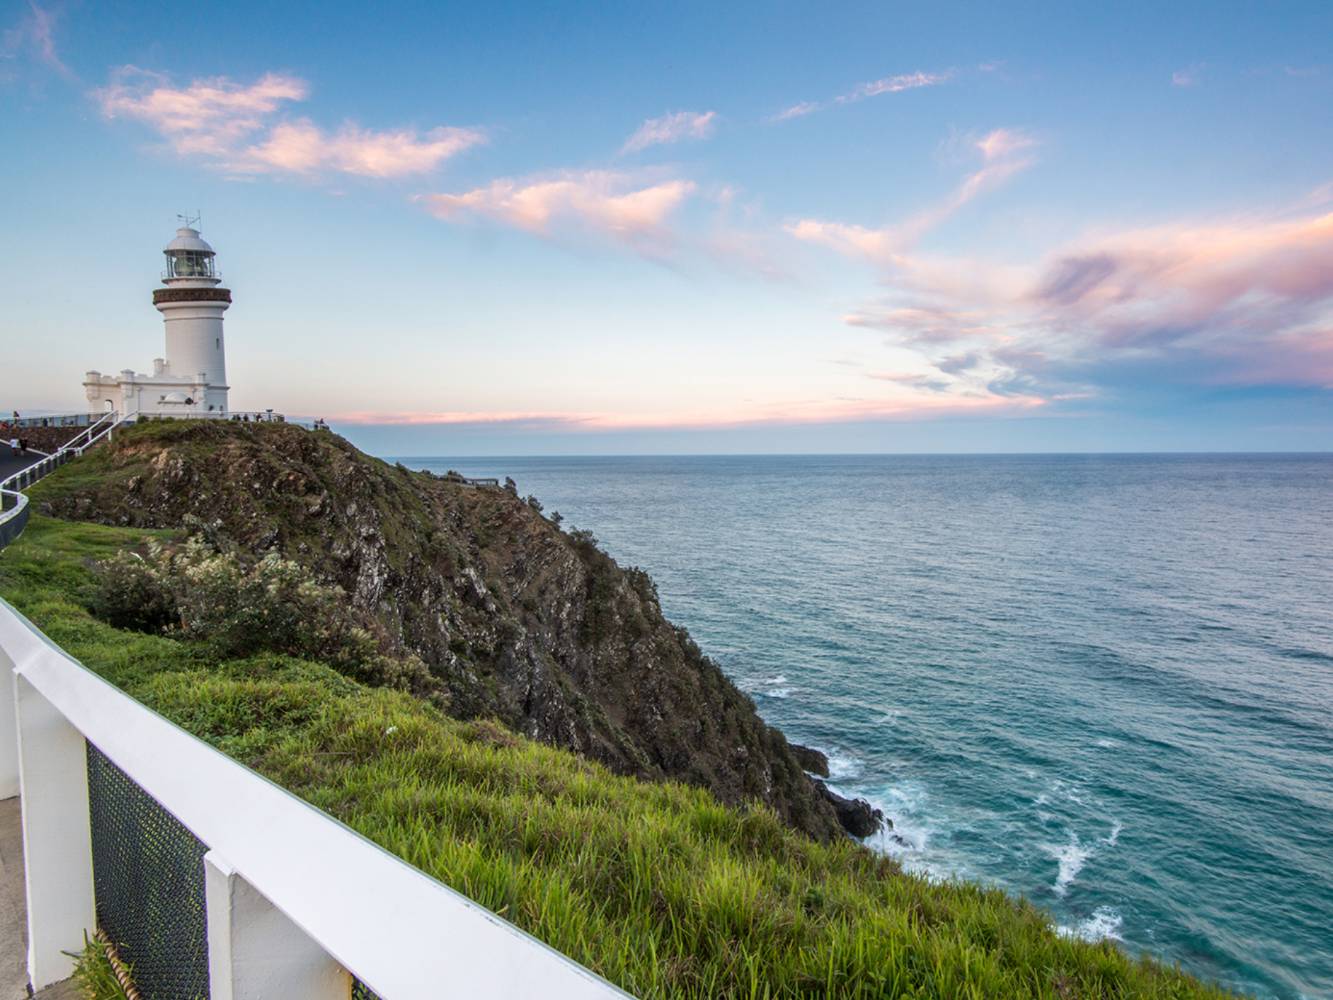 Iconic lighthouse walk, 15 mins drive from home